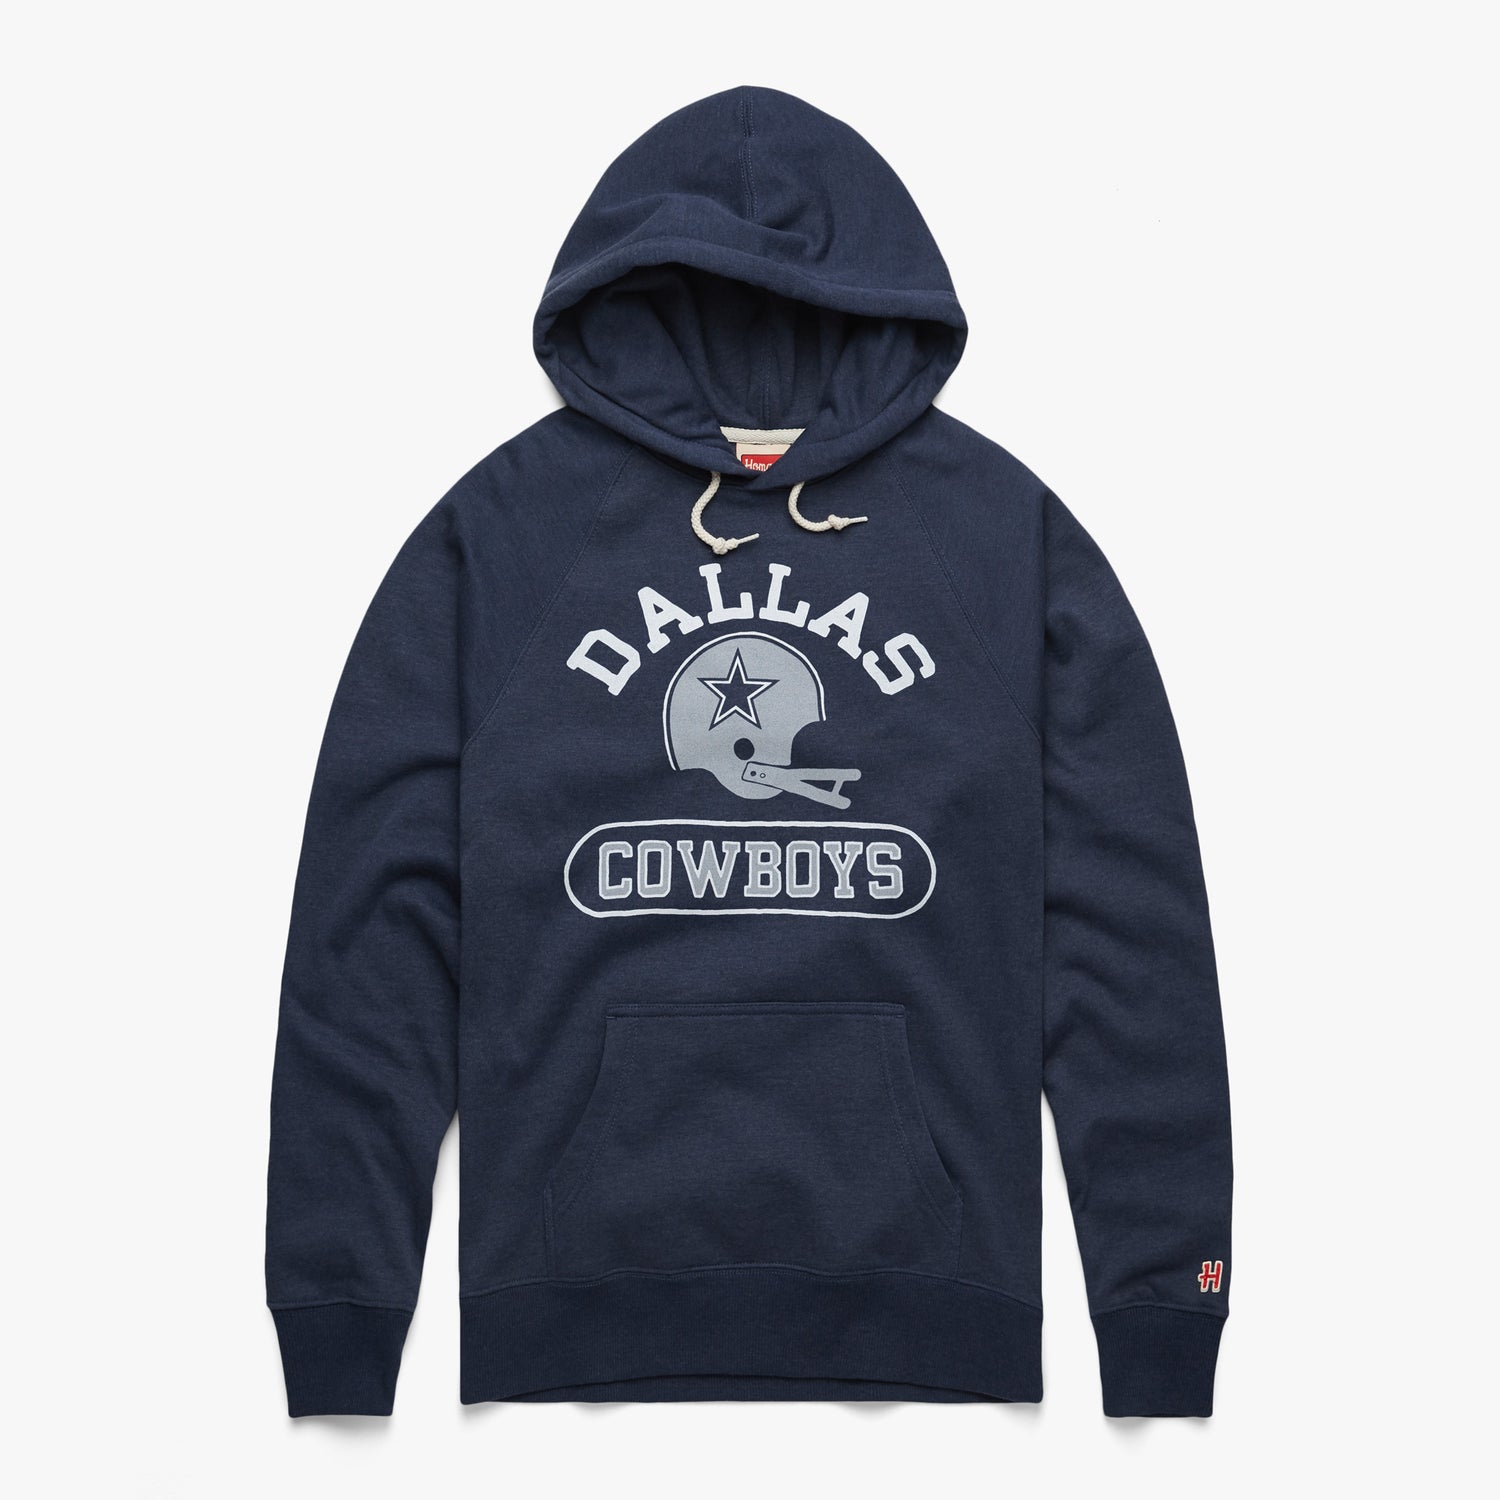 Dallas Cowboys Throwback Helmet Hoodie from Homage. | Officially Licensed Vintage NFL Apparel from Homage Pro Shop.